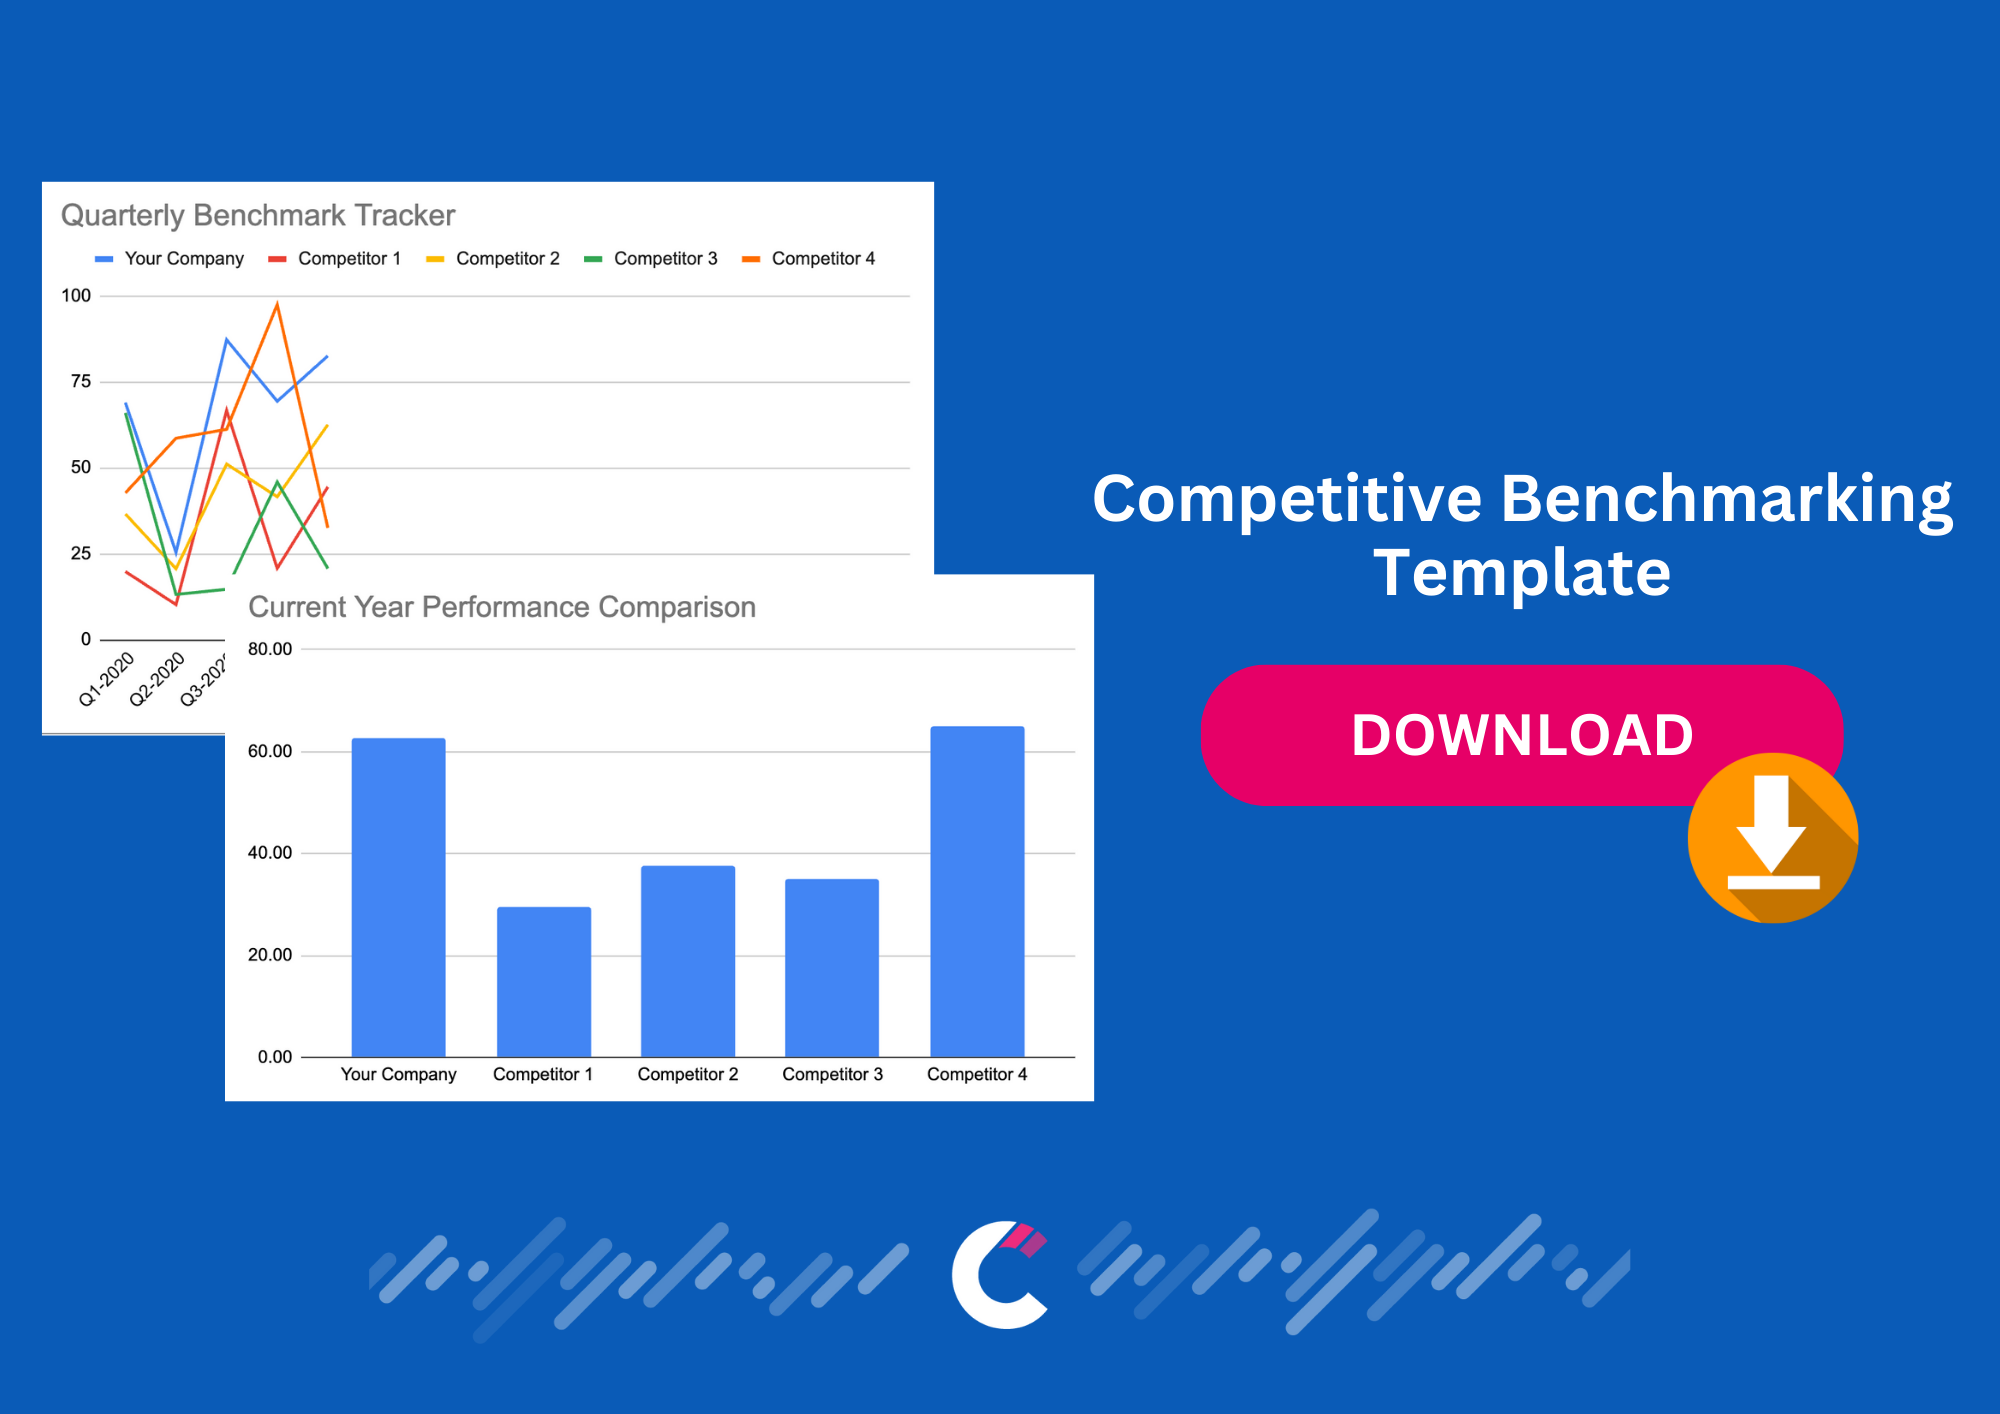 Competitive Benchmarking Template